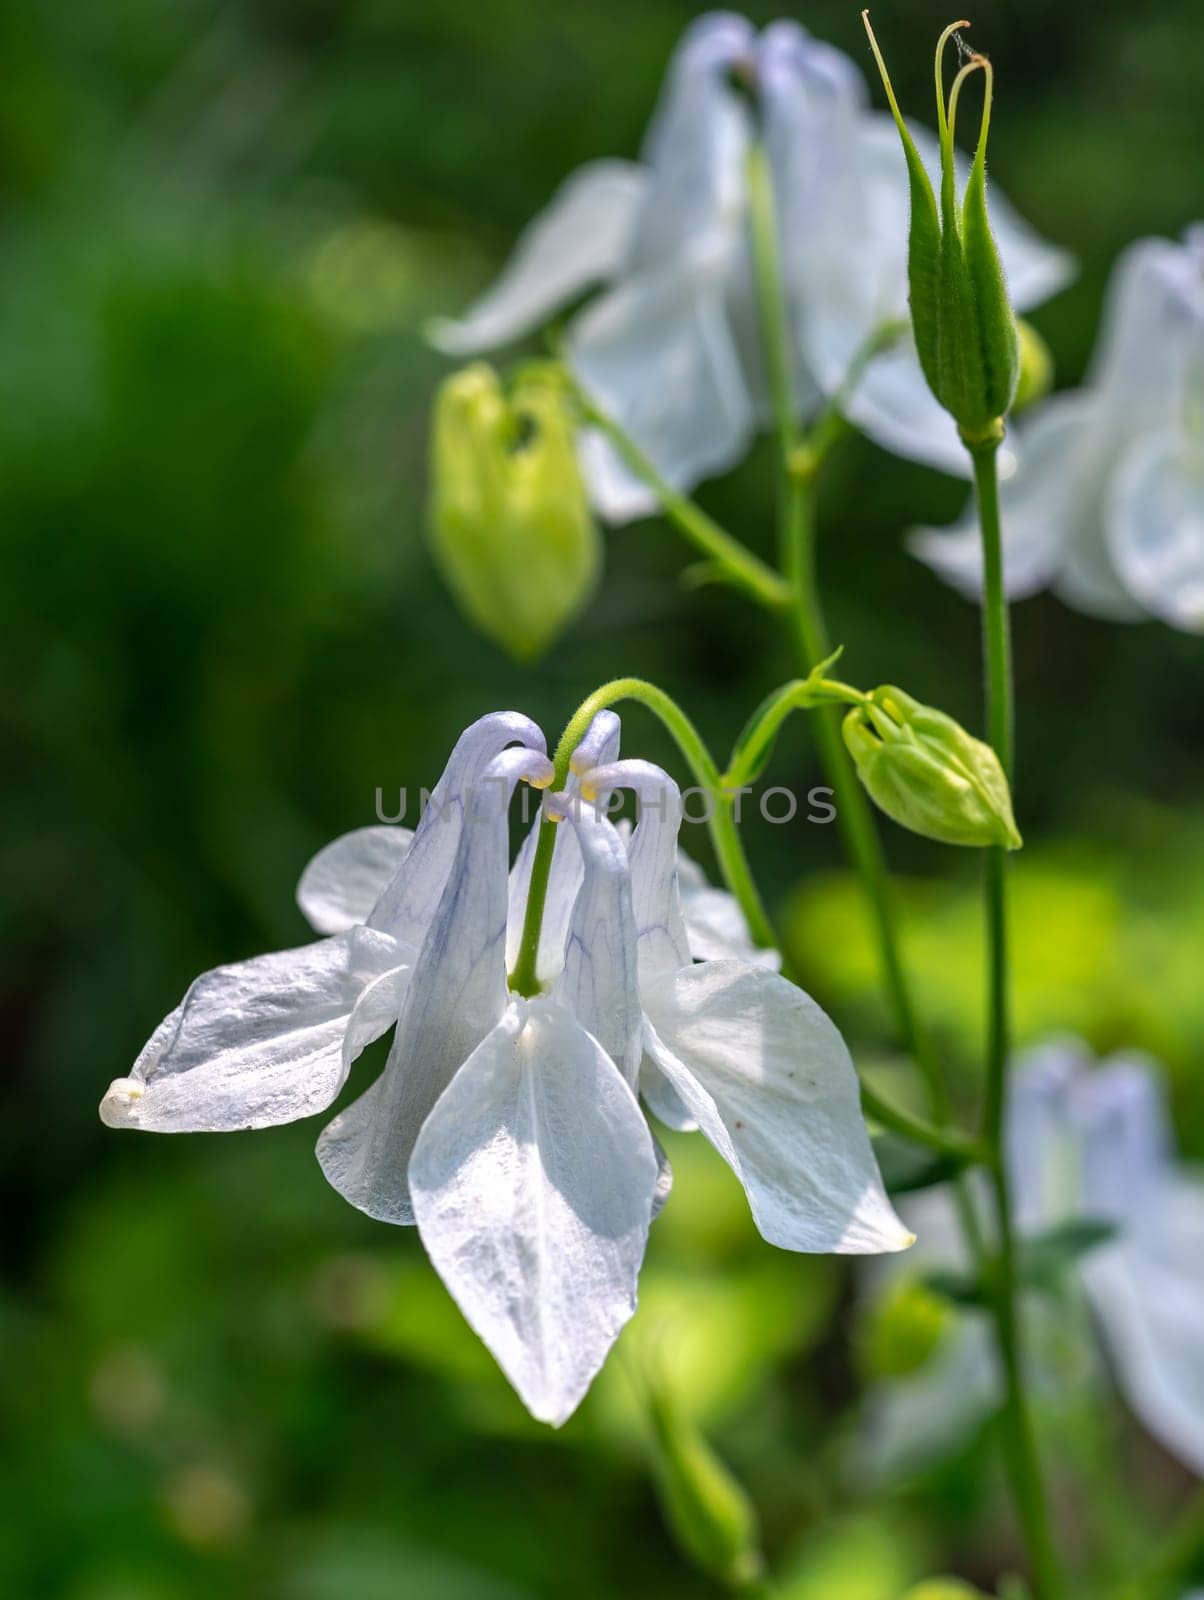 Beautiful Blooming white Aquilegia in a garden on a green leaves background